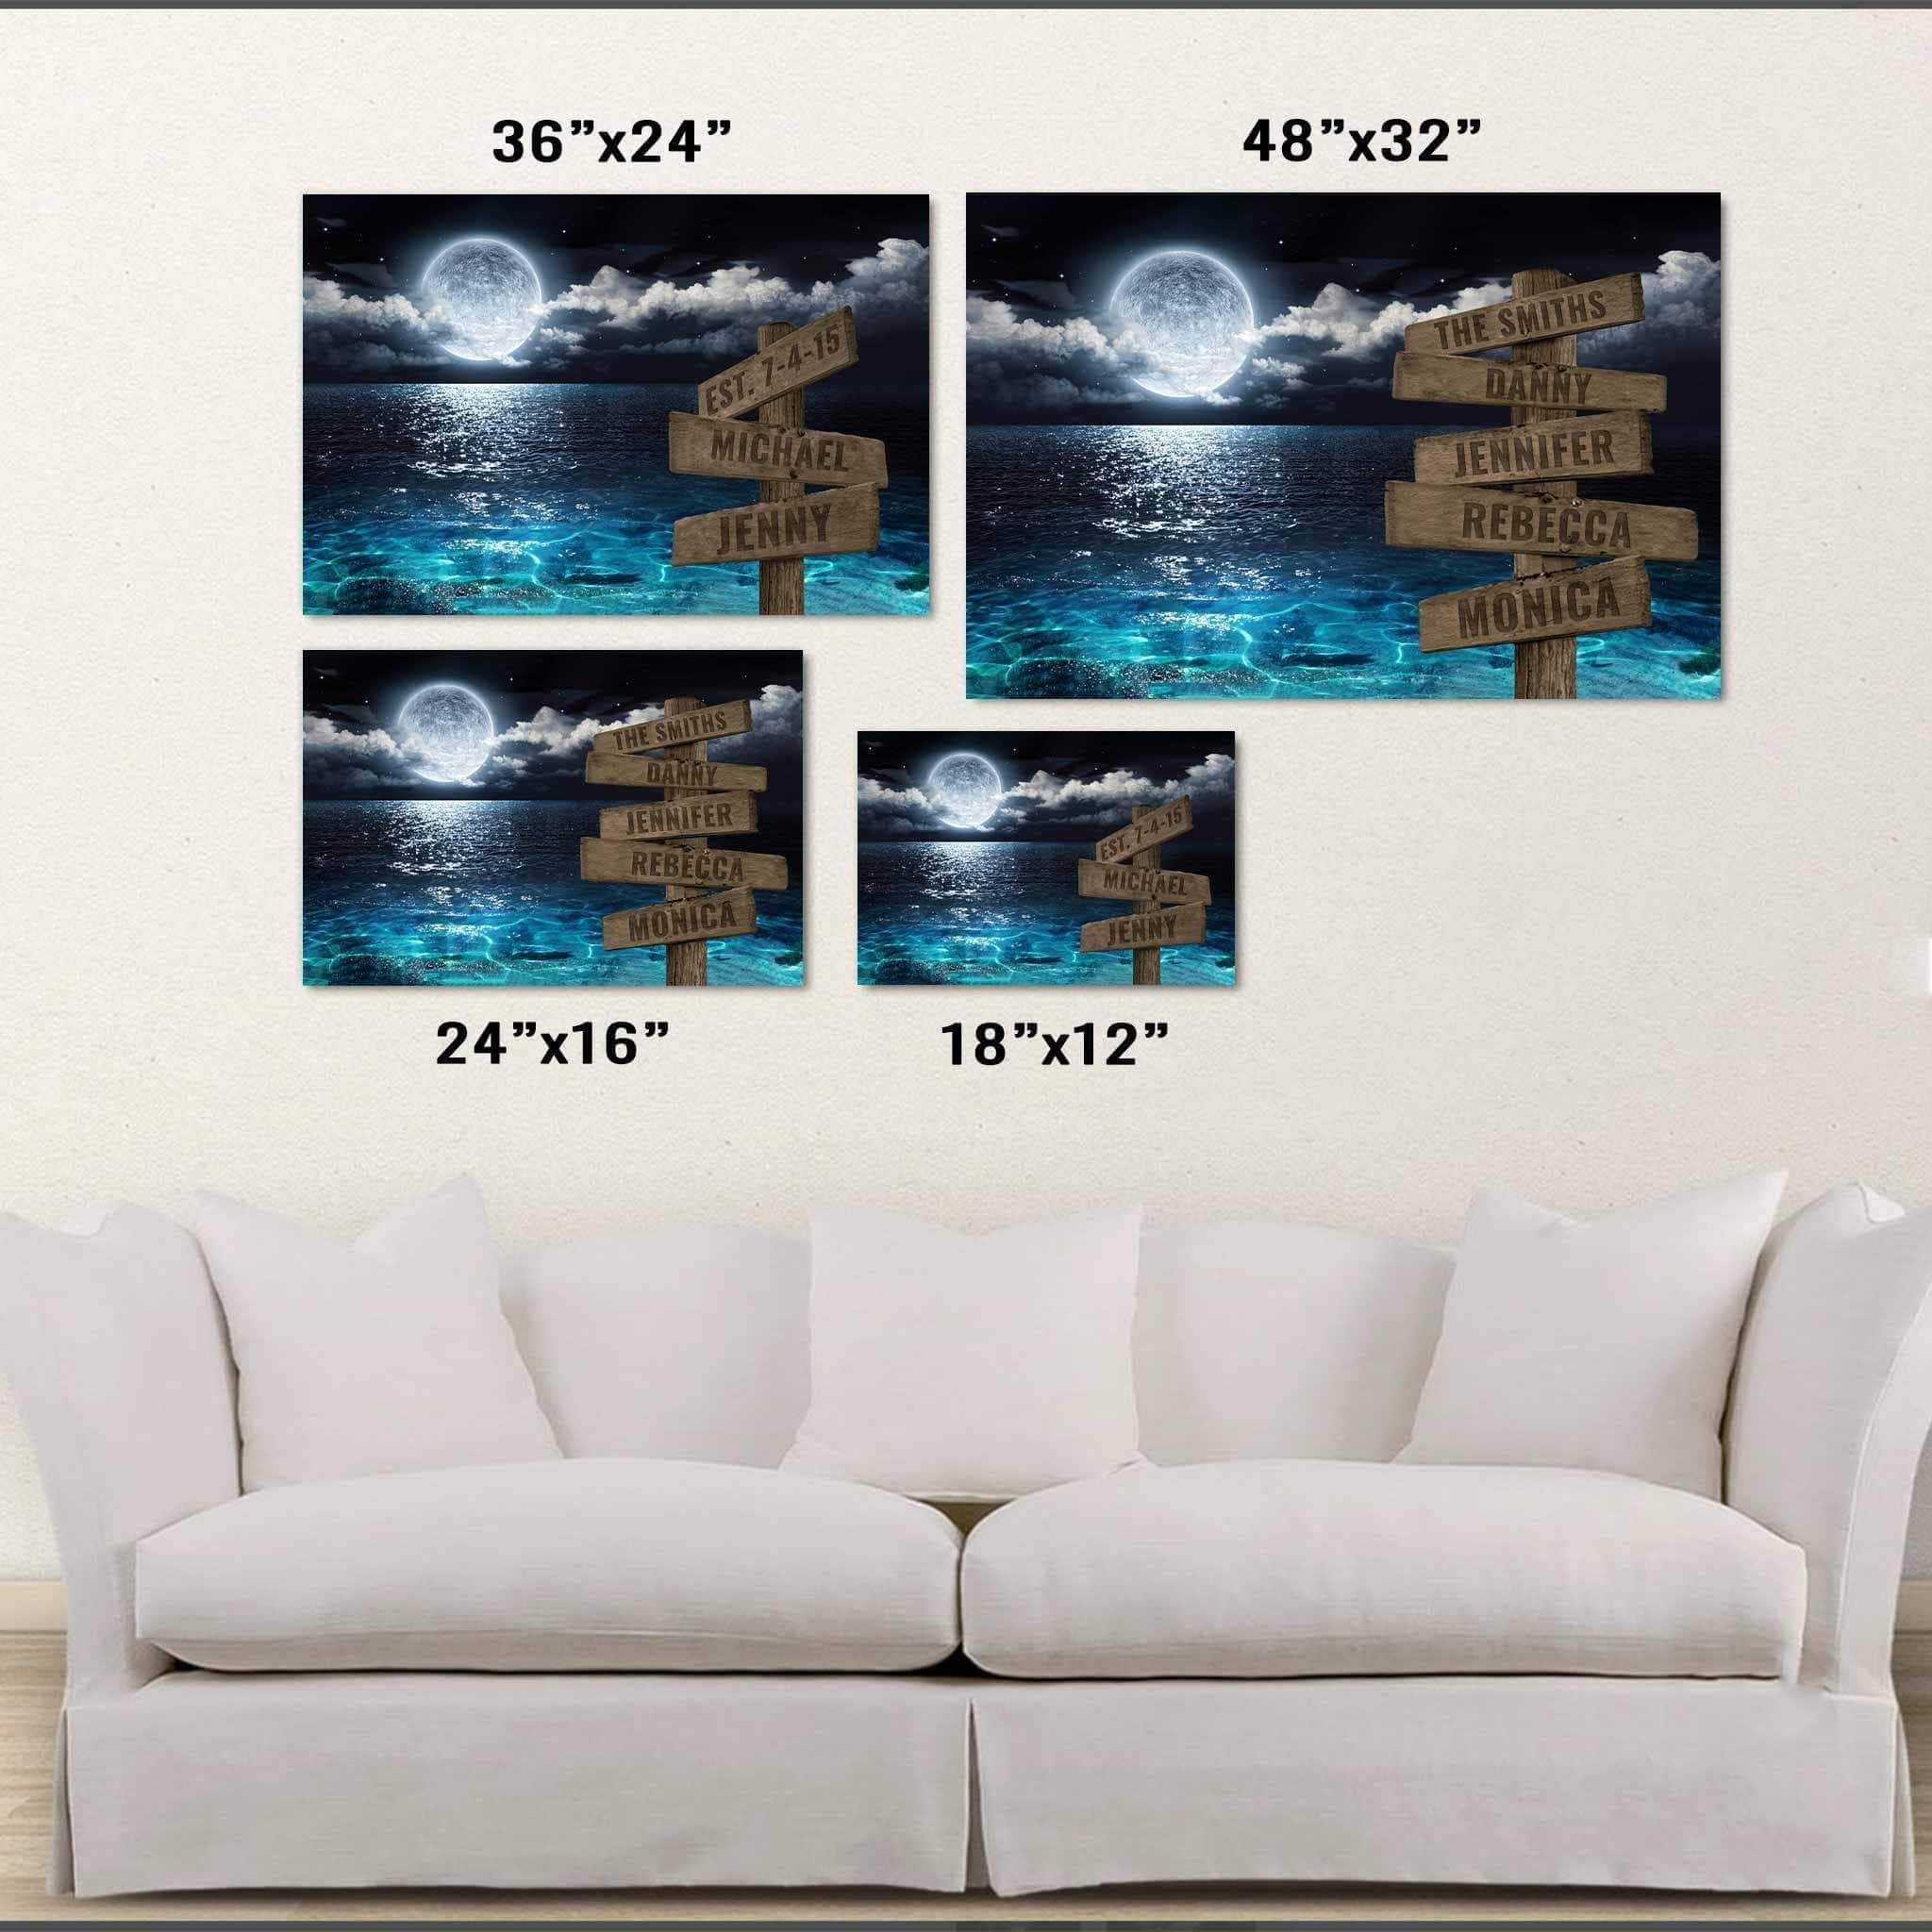 Full Moon Ocean Nightscape v1 Multiple Names Personalized Directional Sign PosterCustomly Gifts